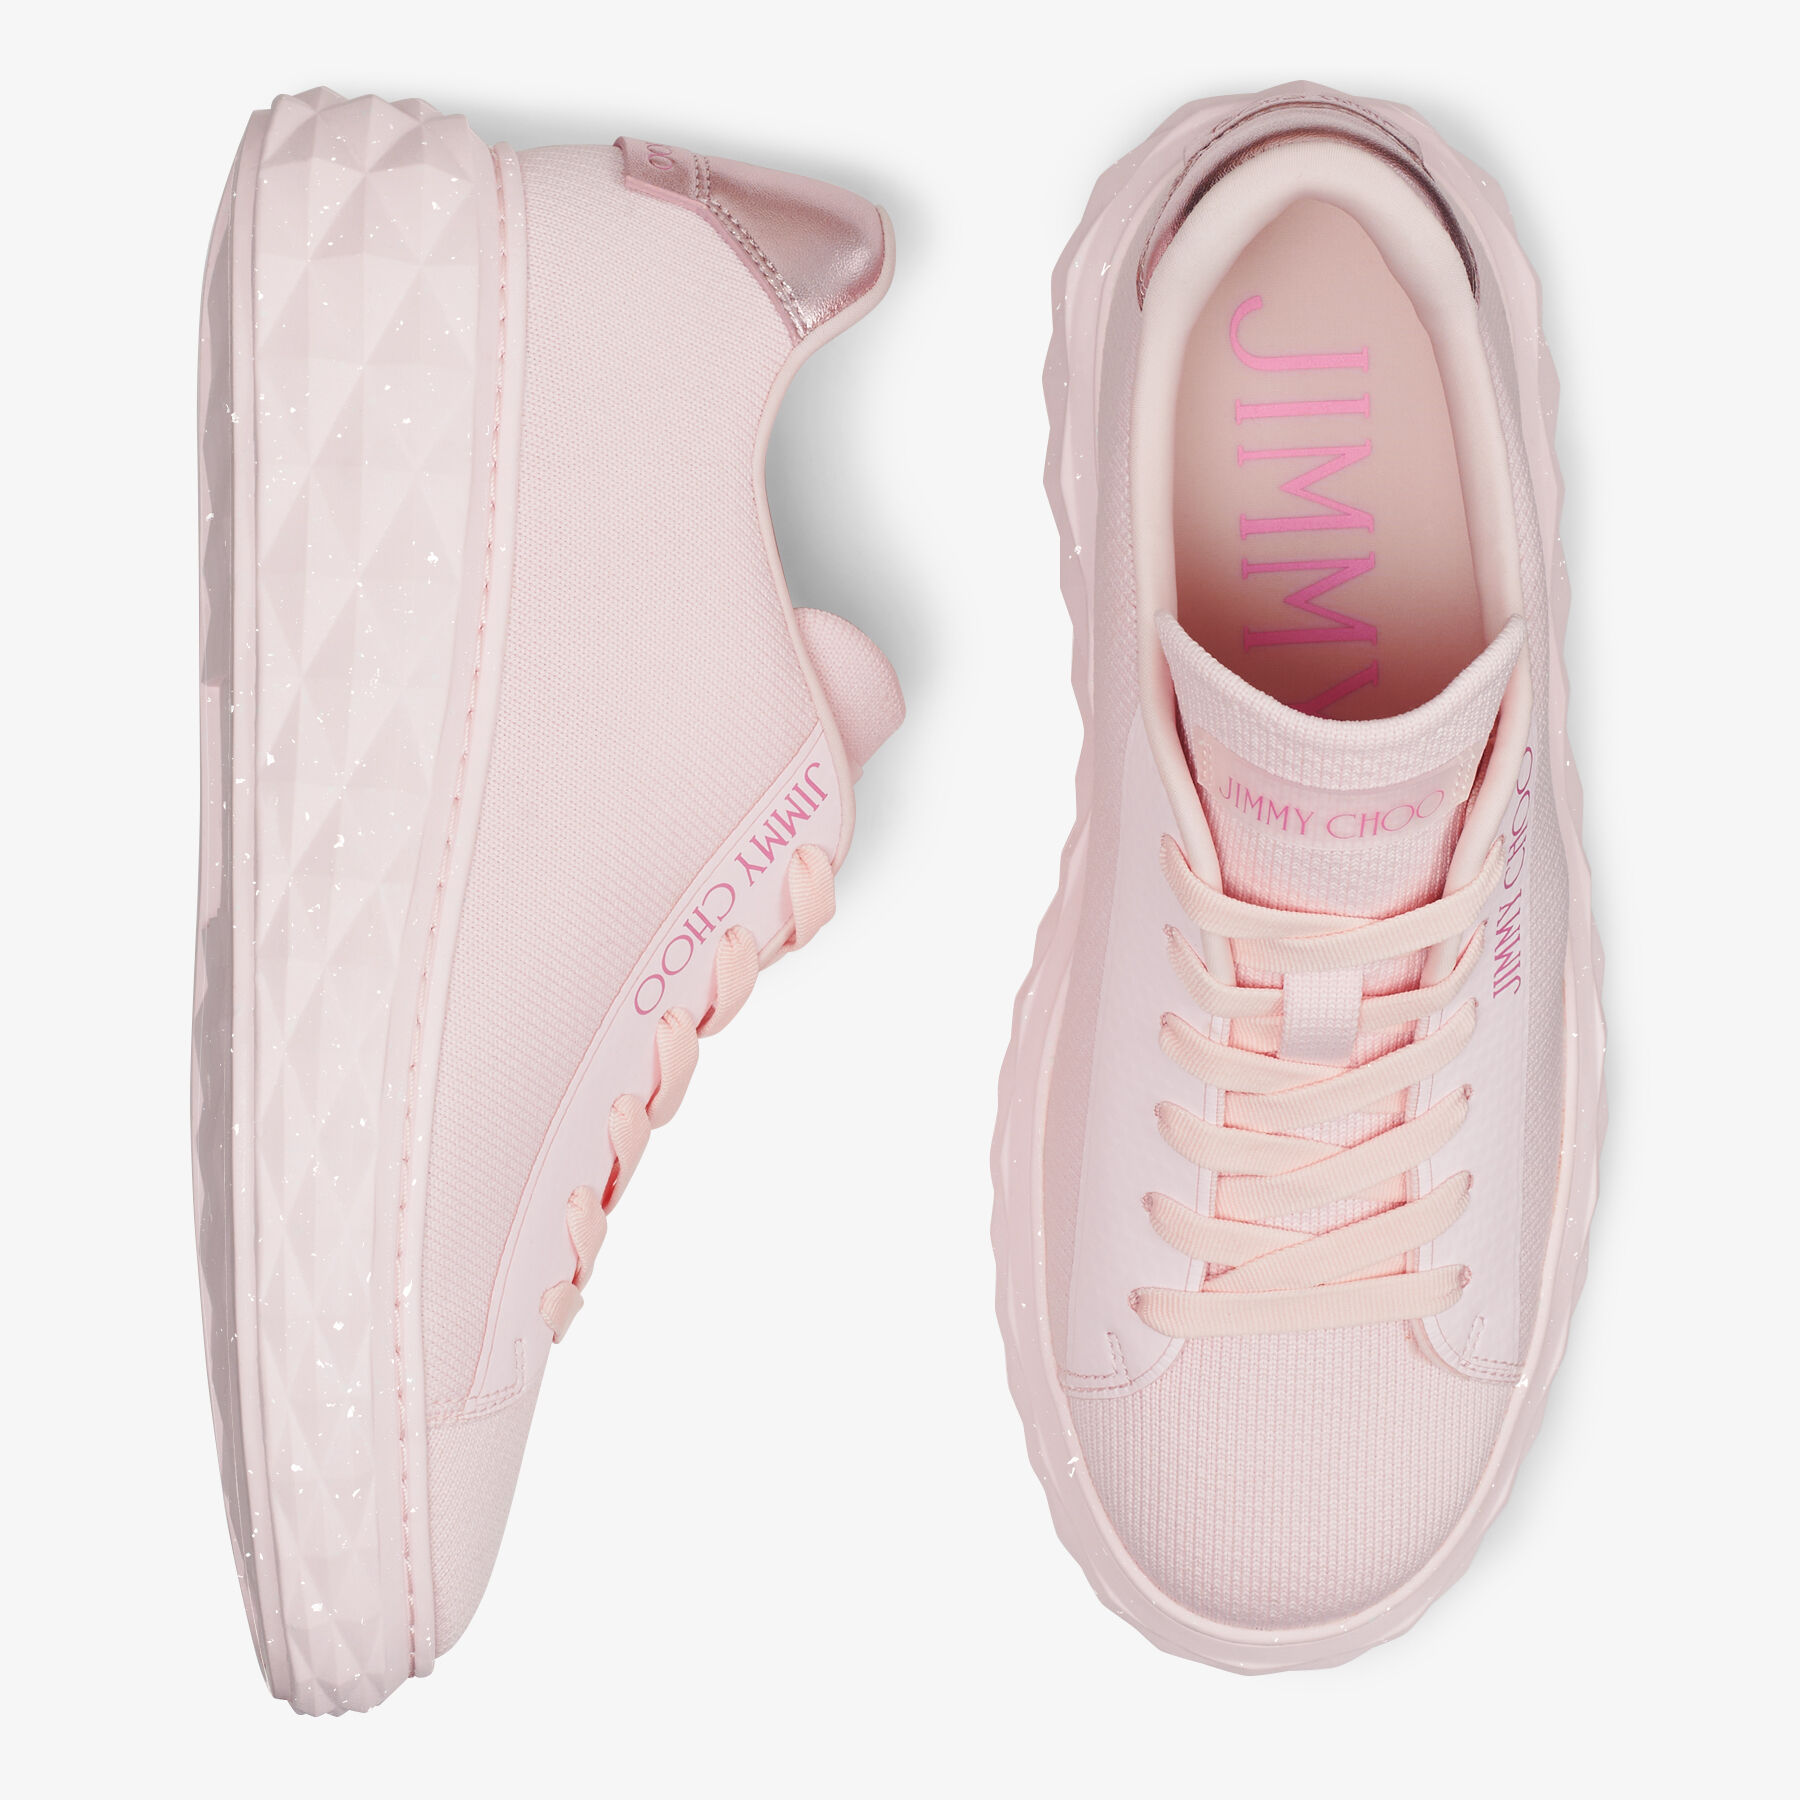 DIAMOND LIGHT MAXI/F | Powder Pink Knit Low-Top Trainers with 